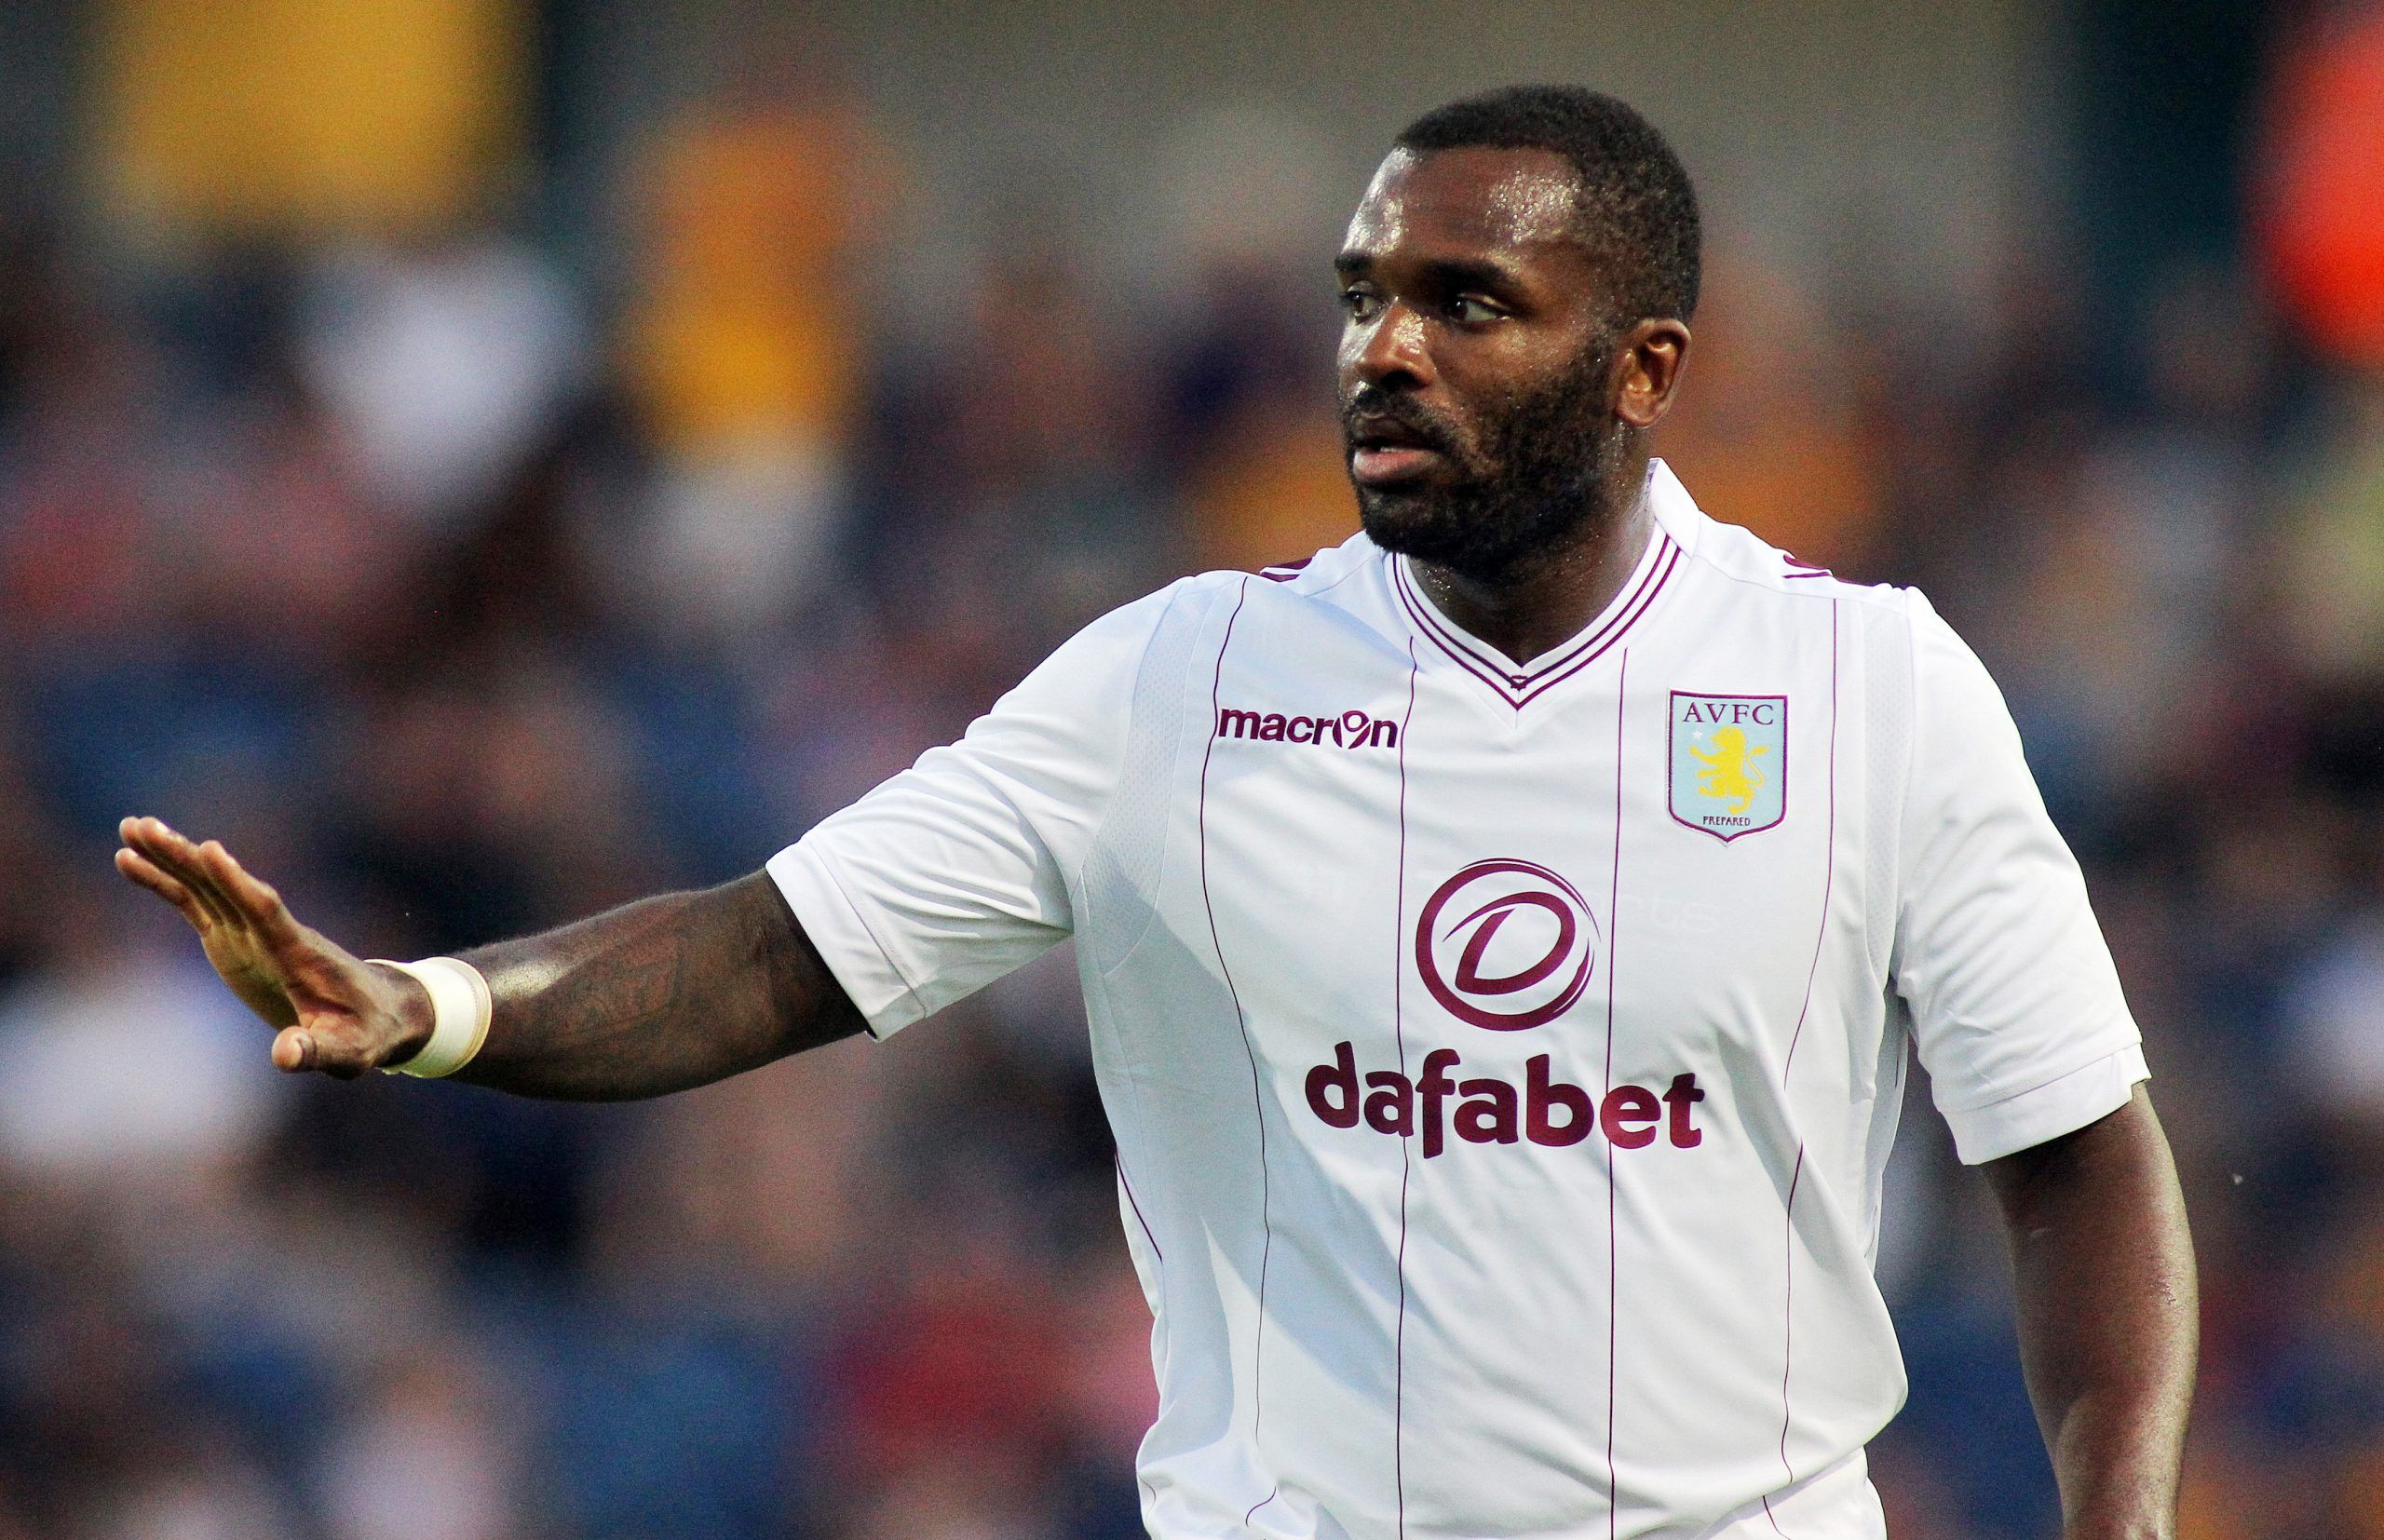 Football - Mansfield Town v Aston Villa - Pre Season Friendly - One Call Stadium - 17/7/14 
Darren Bent of Aston Villa 
Mandatory Credit: Action Images / Ed Sykes 
Livepic 
EDITORIAL USE ONLY.